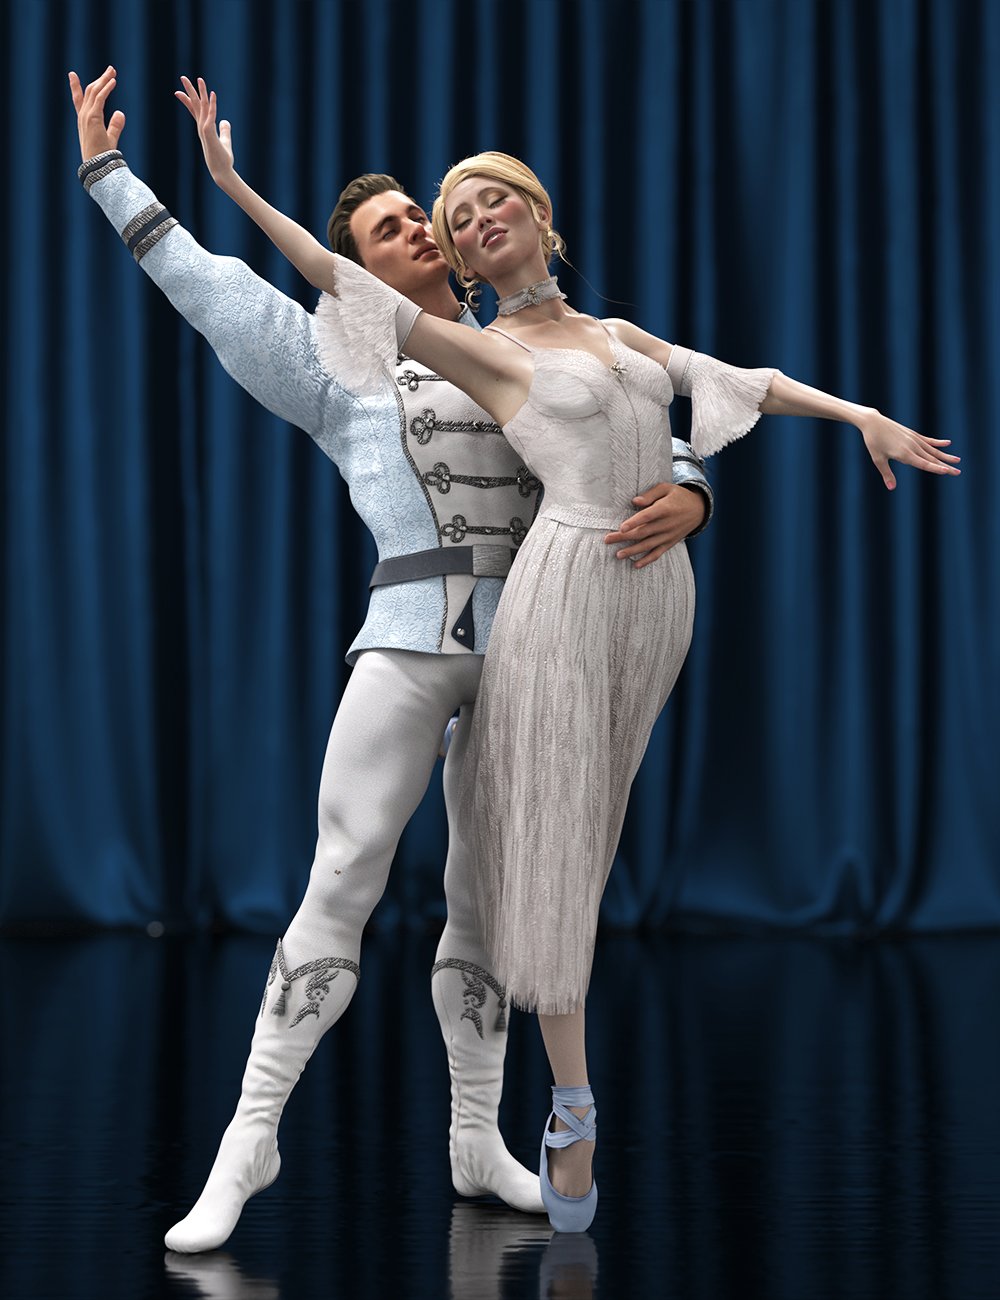 Finest Classical Ballet Poses for Genesis 8.1 Male and Female